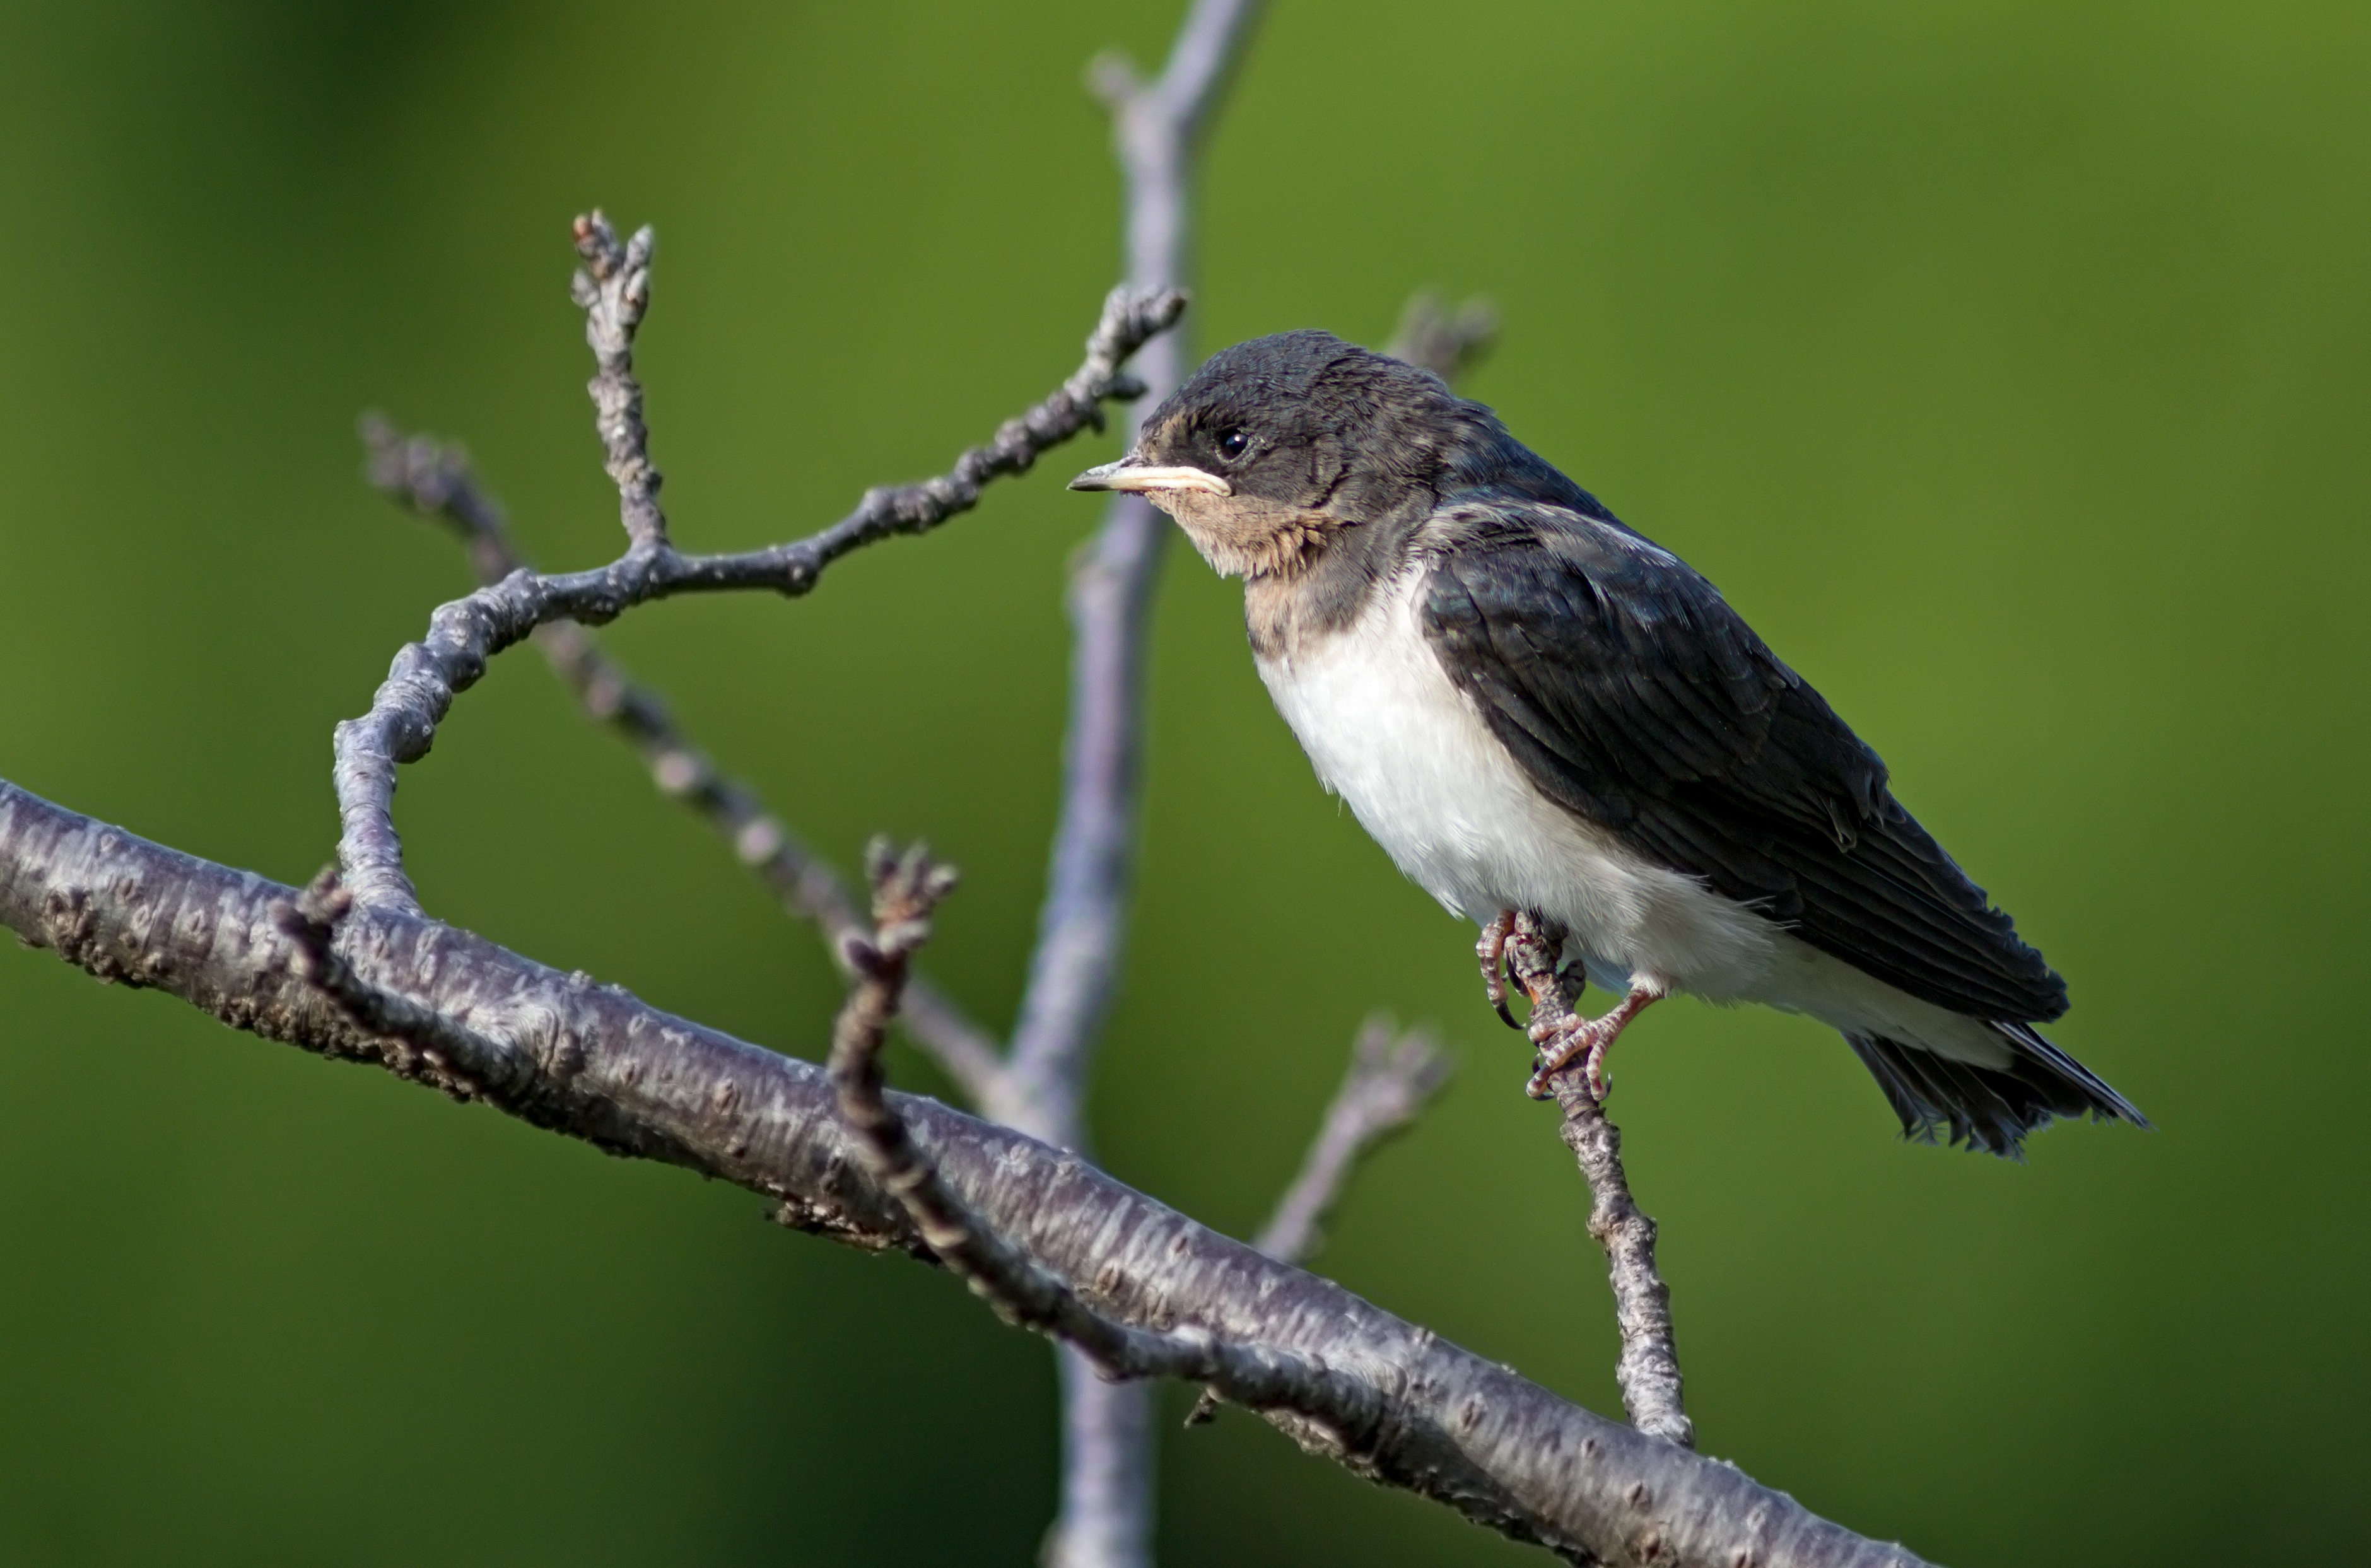 File:Small bird perching on a branch.jpg - Wikimedia Commons